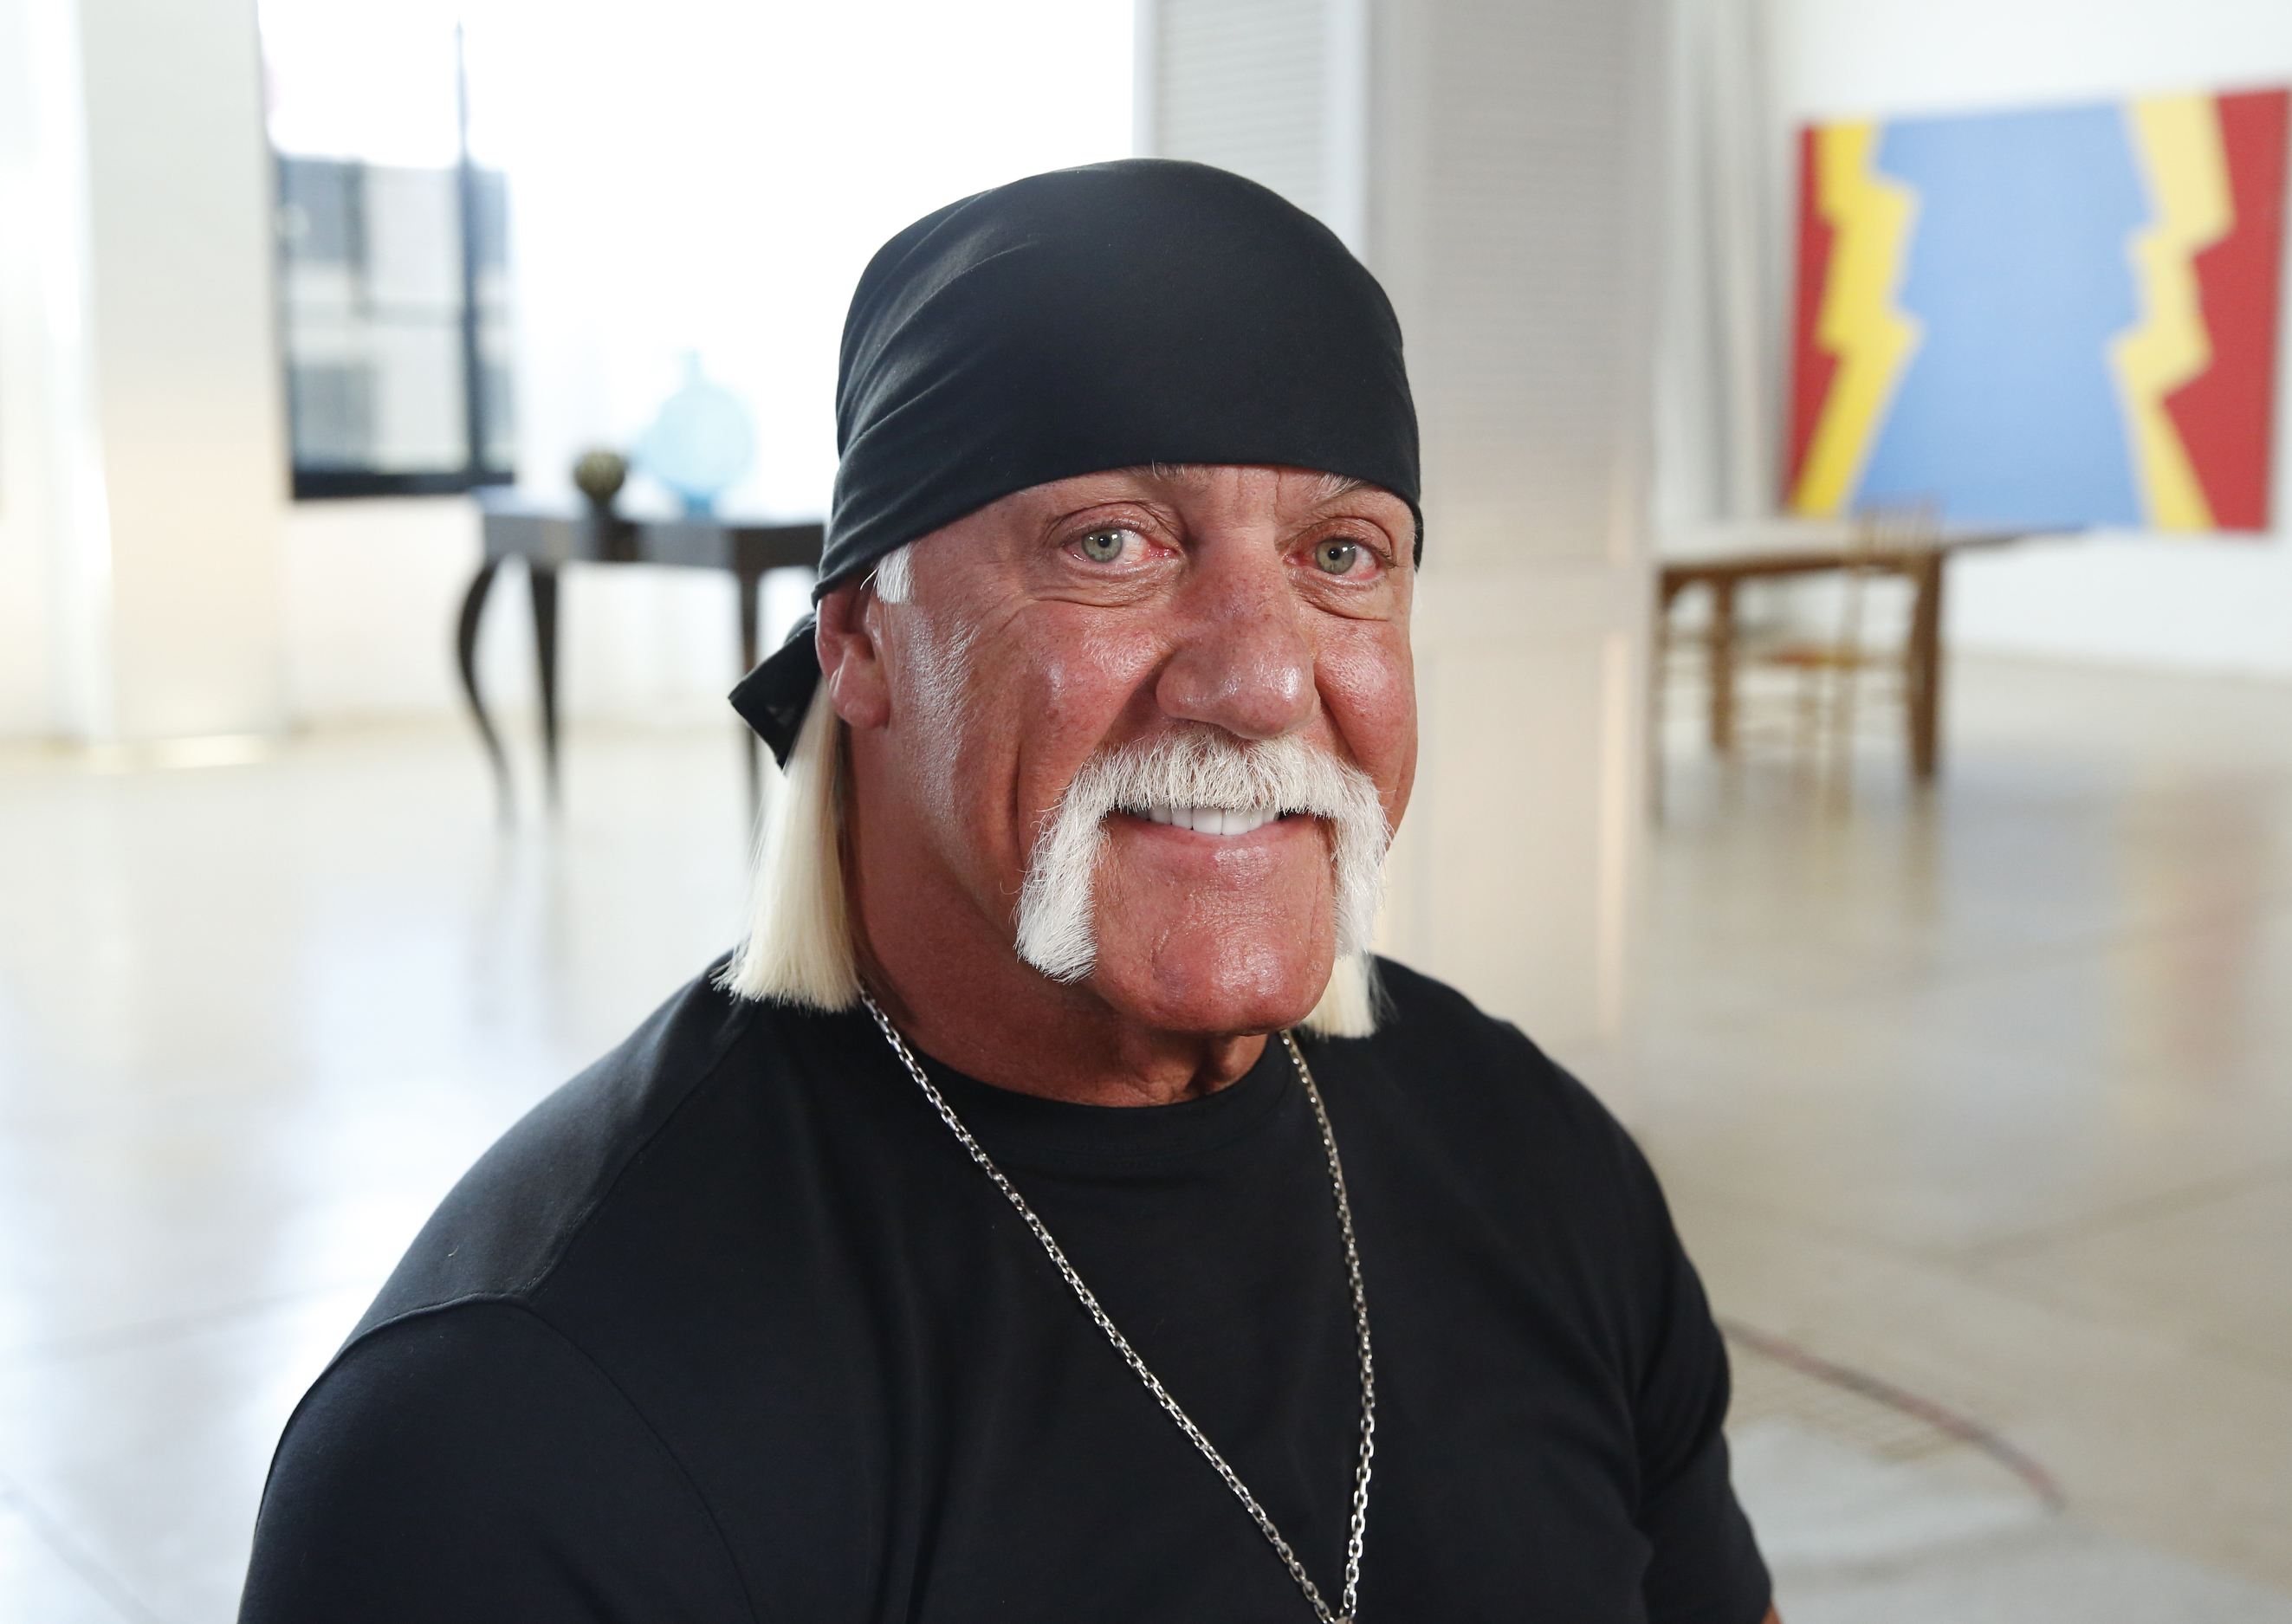 Hulk Hogan sitting down for an interview for "Good Morning America" on August 28, 2015 | Source: Getty Images